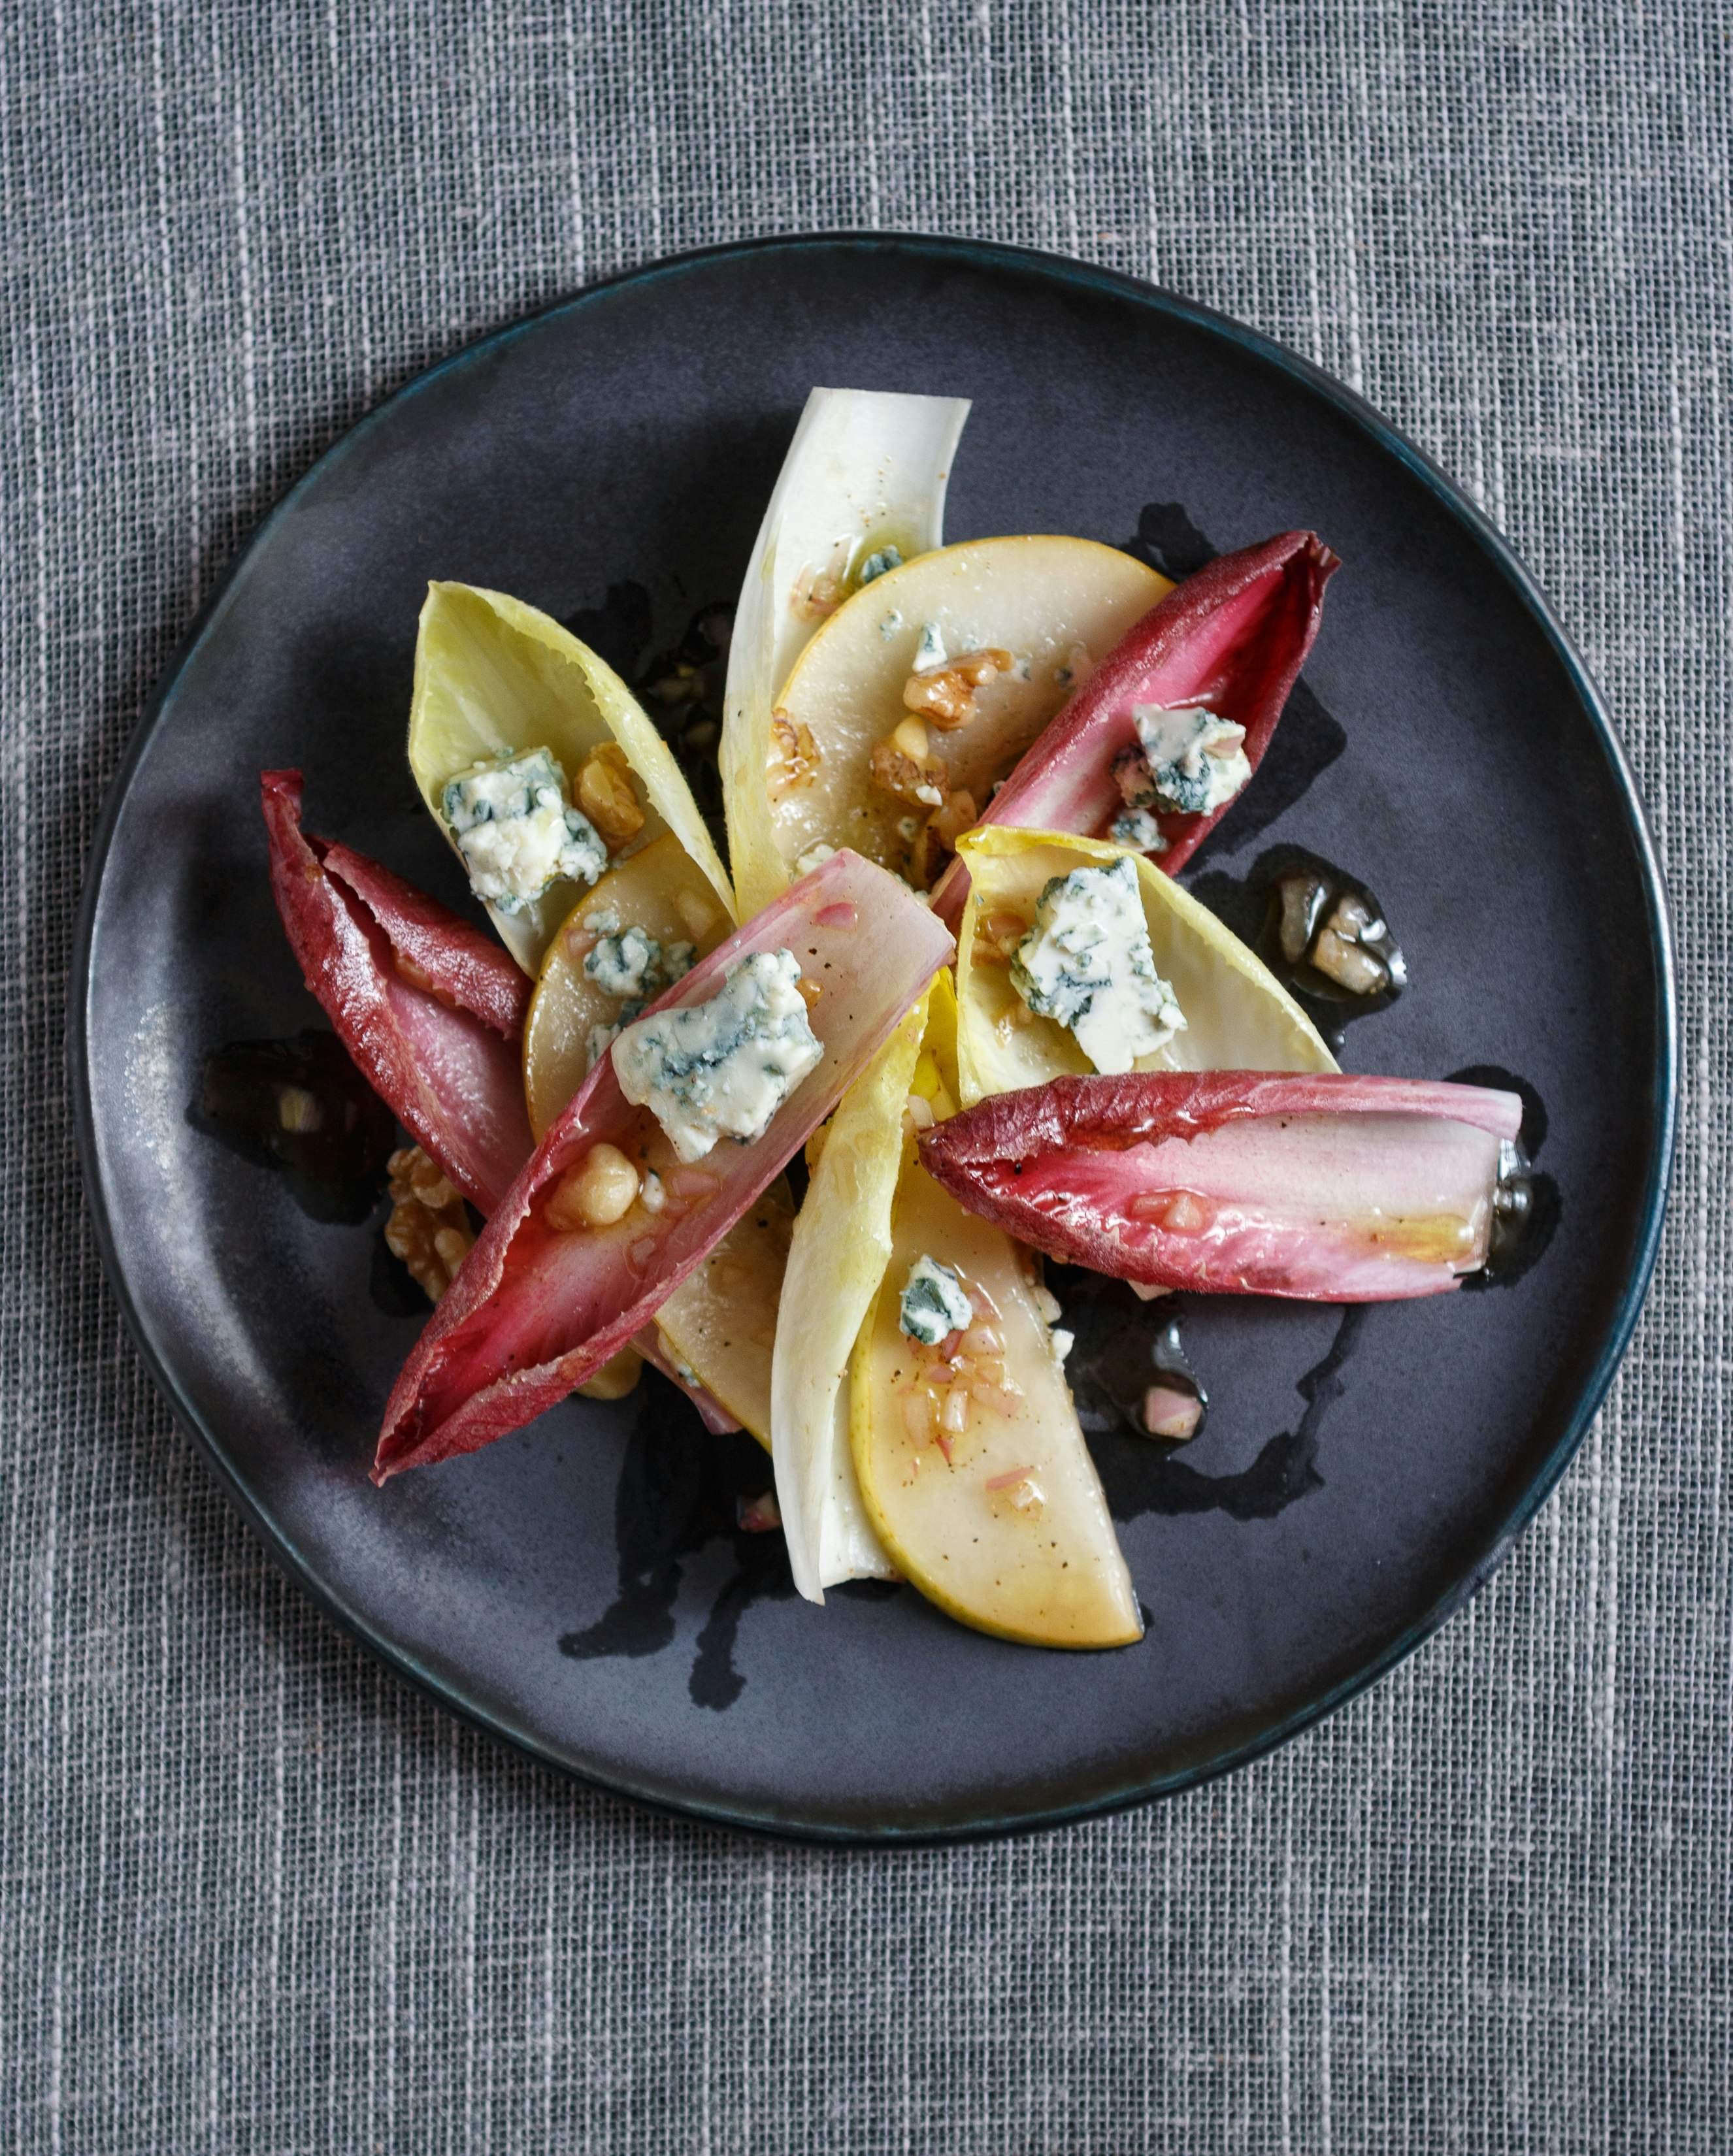 Best Endive Salad with Pears, Blue Cheese, and Walnuts Recipe - The ...